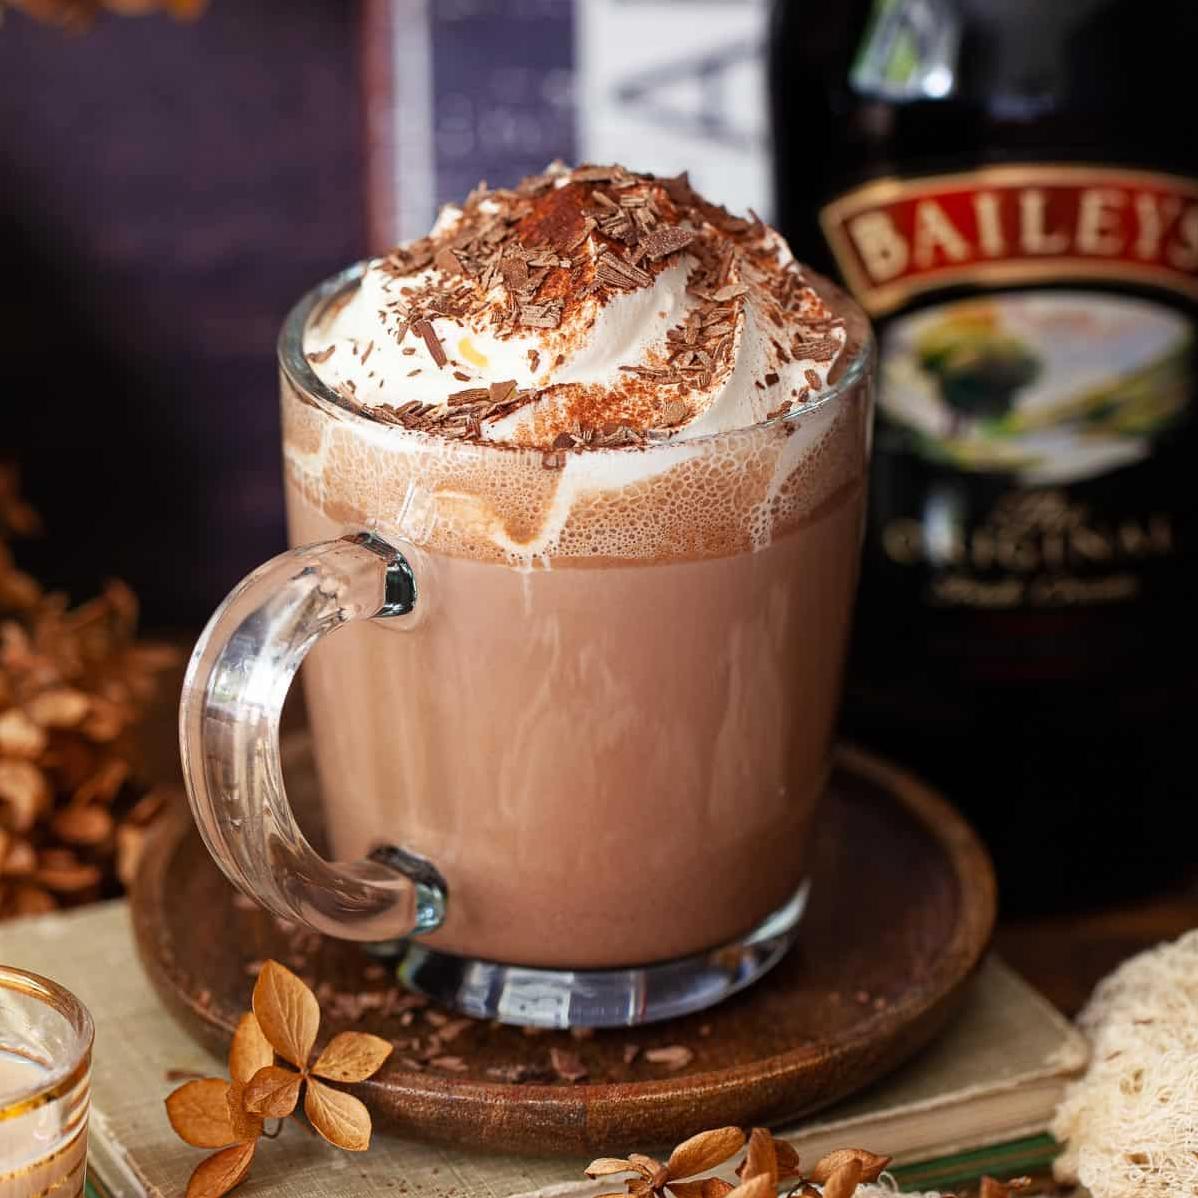  A mug of hot chocolate gets a grown-up upgrade with the addition of Irish Cream.